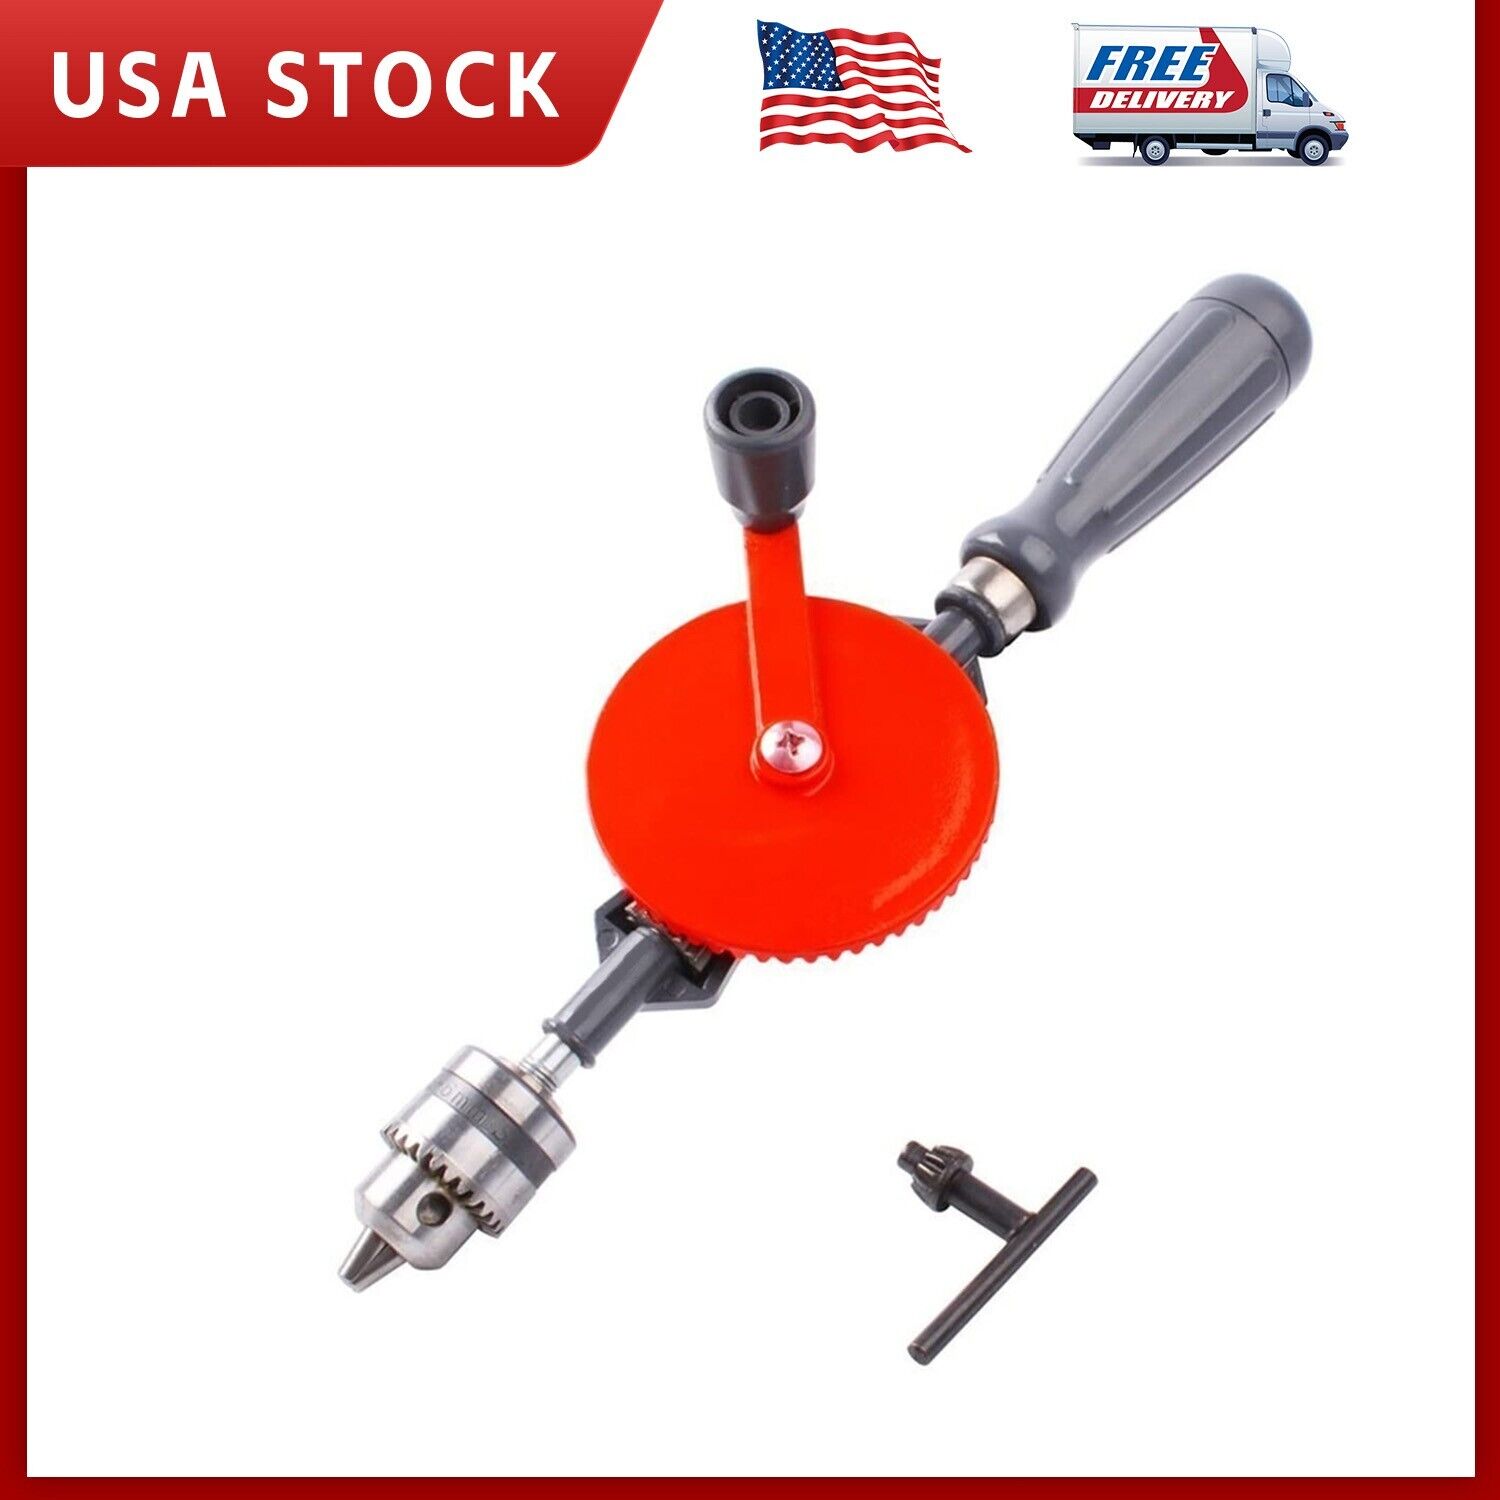 Manual Hand Drill 1/4-Inch Capacity Powerful, 3 Jaw Chucks and Grip Handle